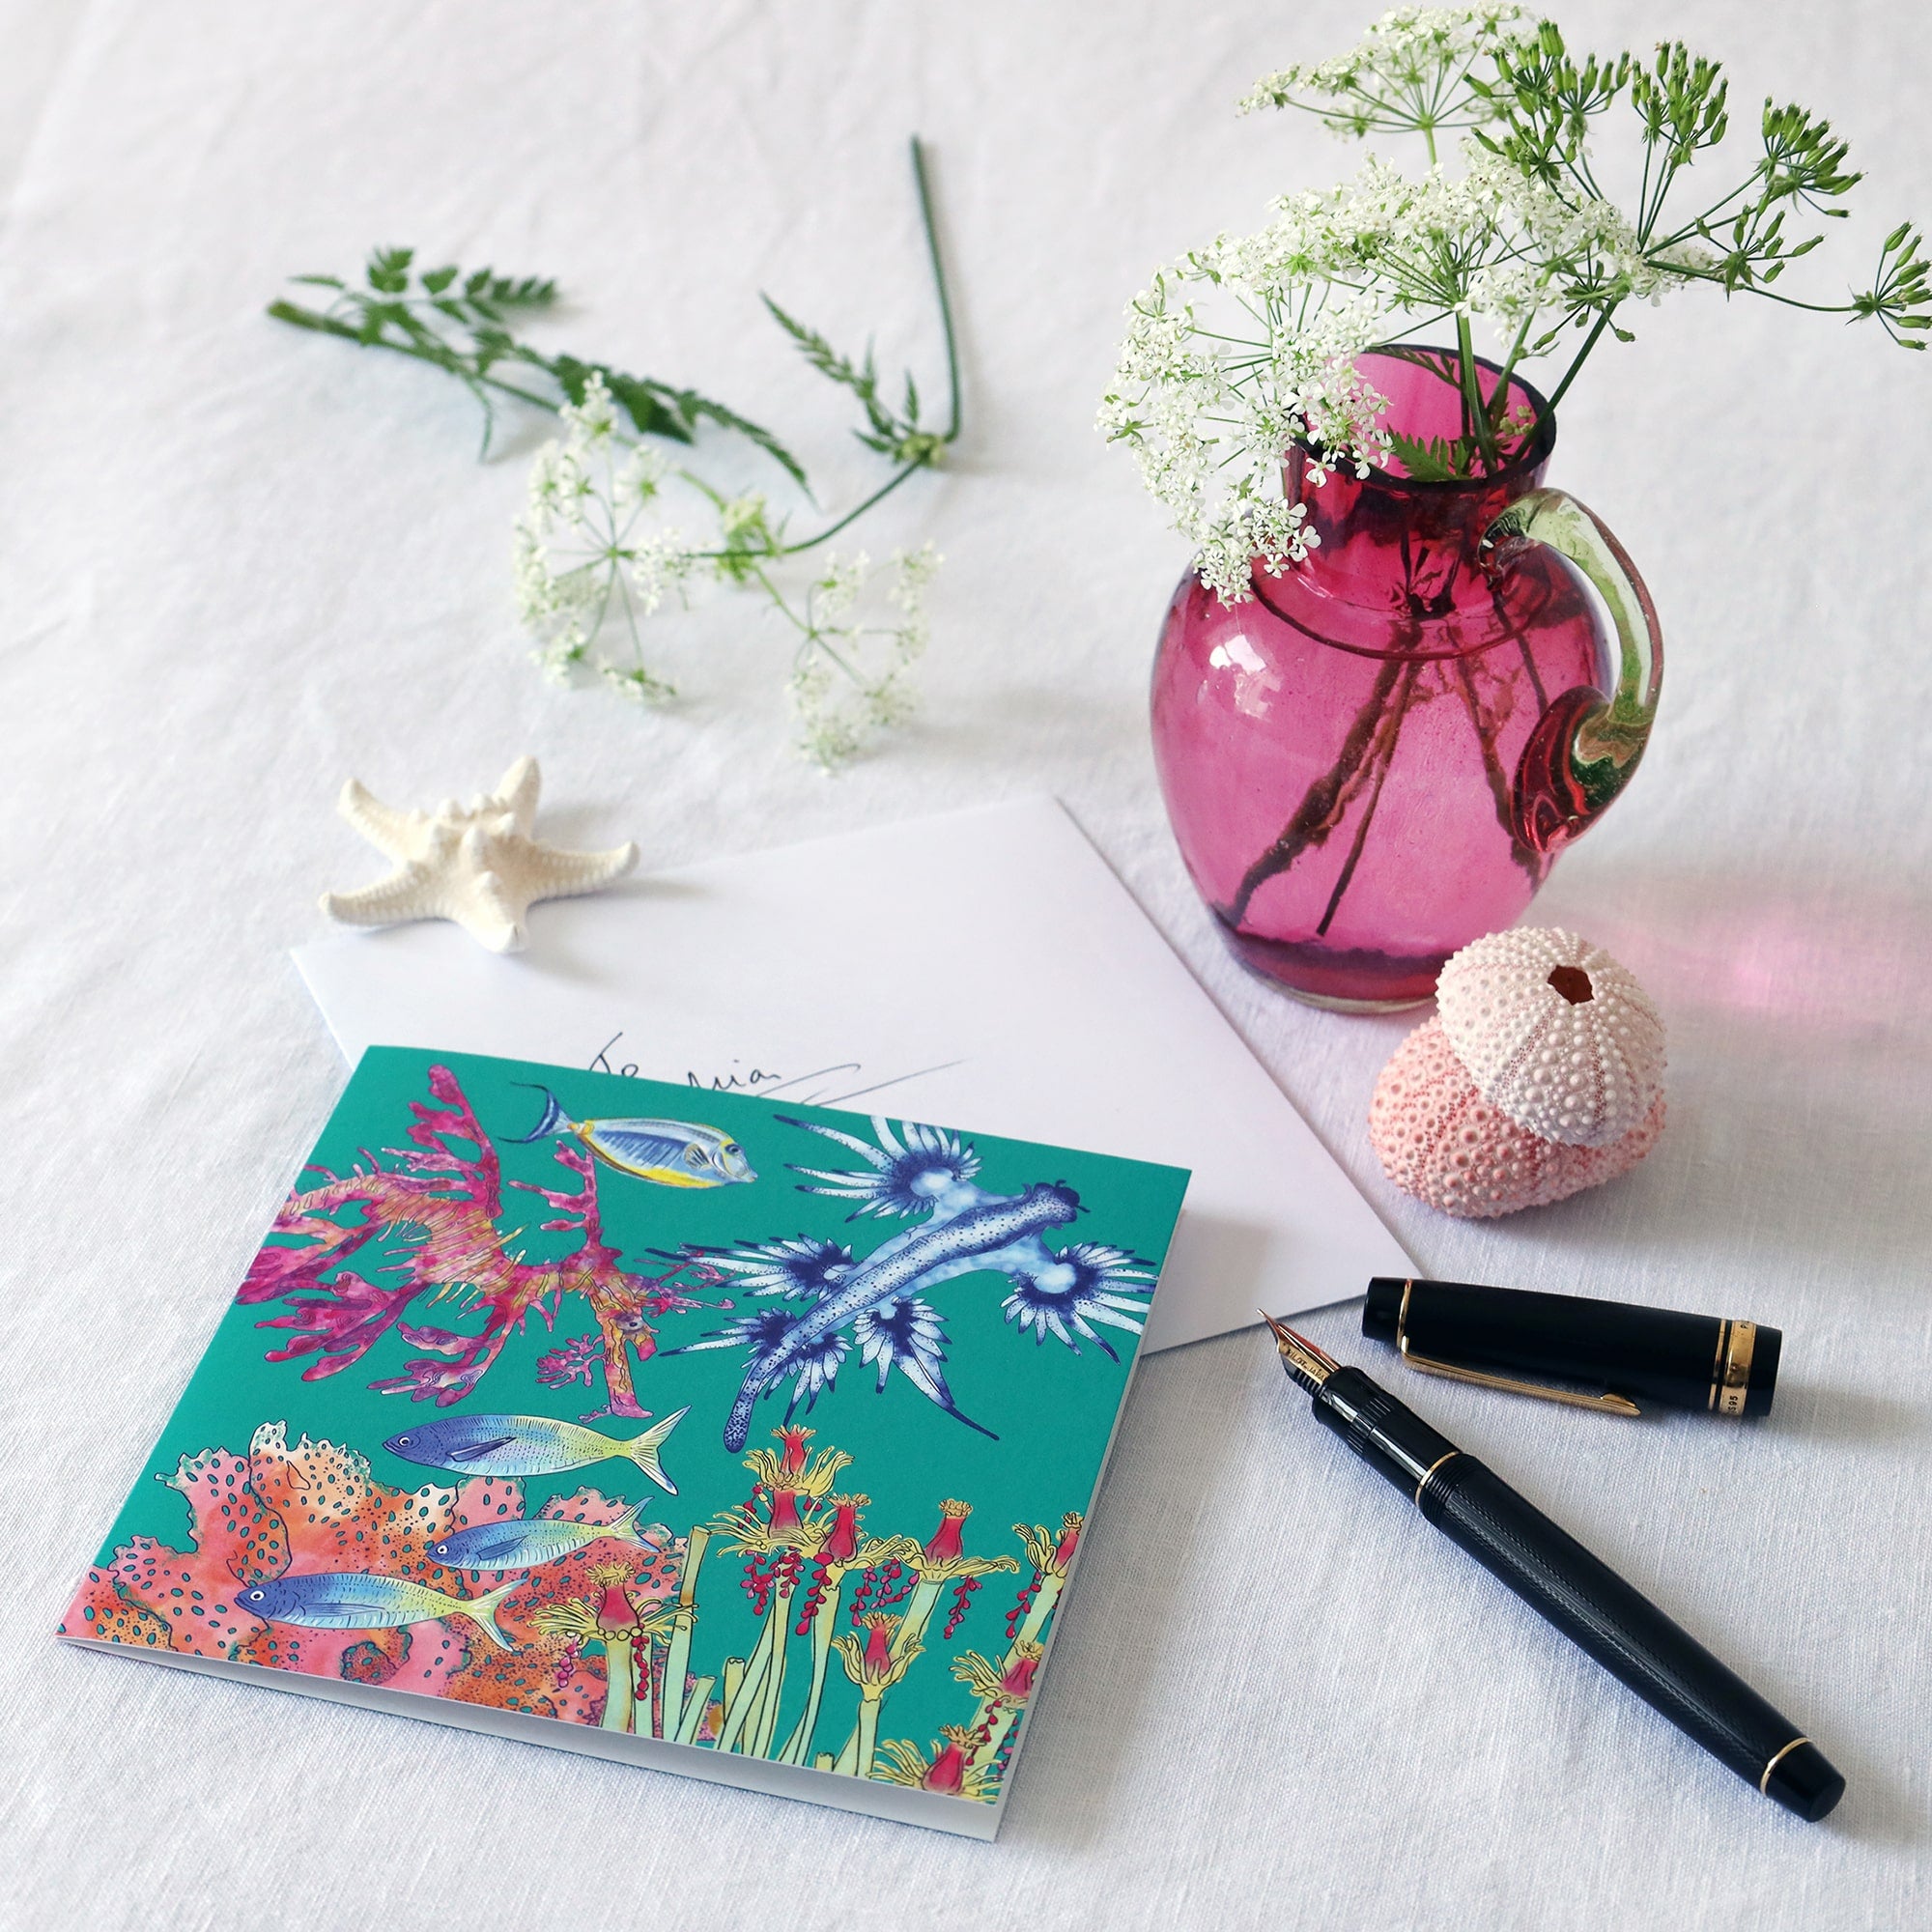 brightly coloured greeting card with illustrations of nudibranch, sea slug tropical fish and coral on a jade coloured background lying on a white table cloth with a fountain pen, hand written envelope shells and a small cranberry glass jug with wild flowers in